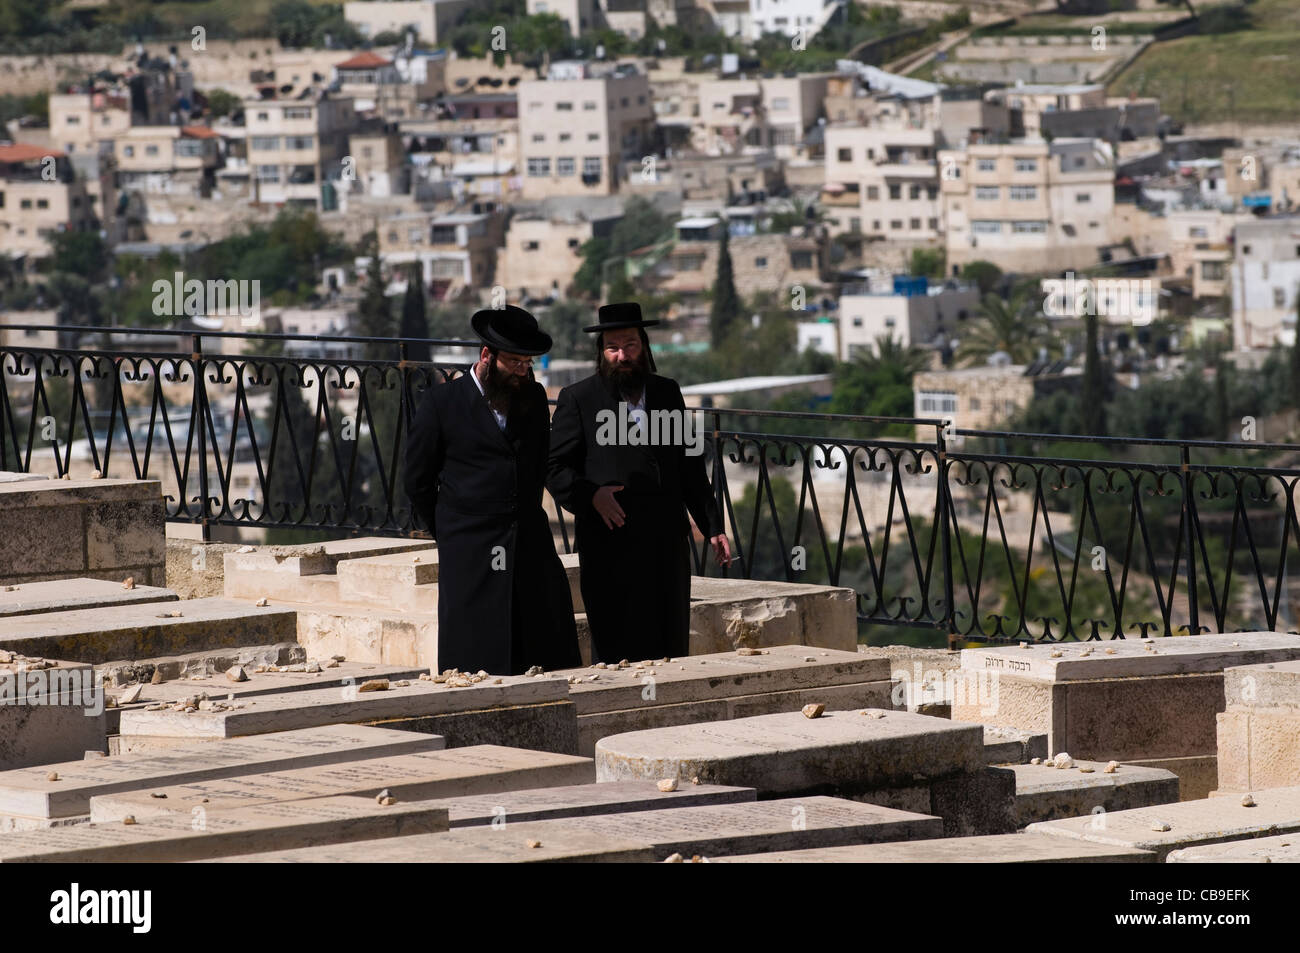 Orthodox Jewish men walking in the Jewish cemetery on the Mount of Olives. Stock Photo